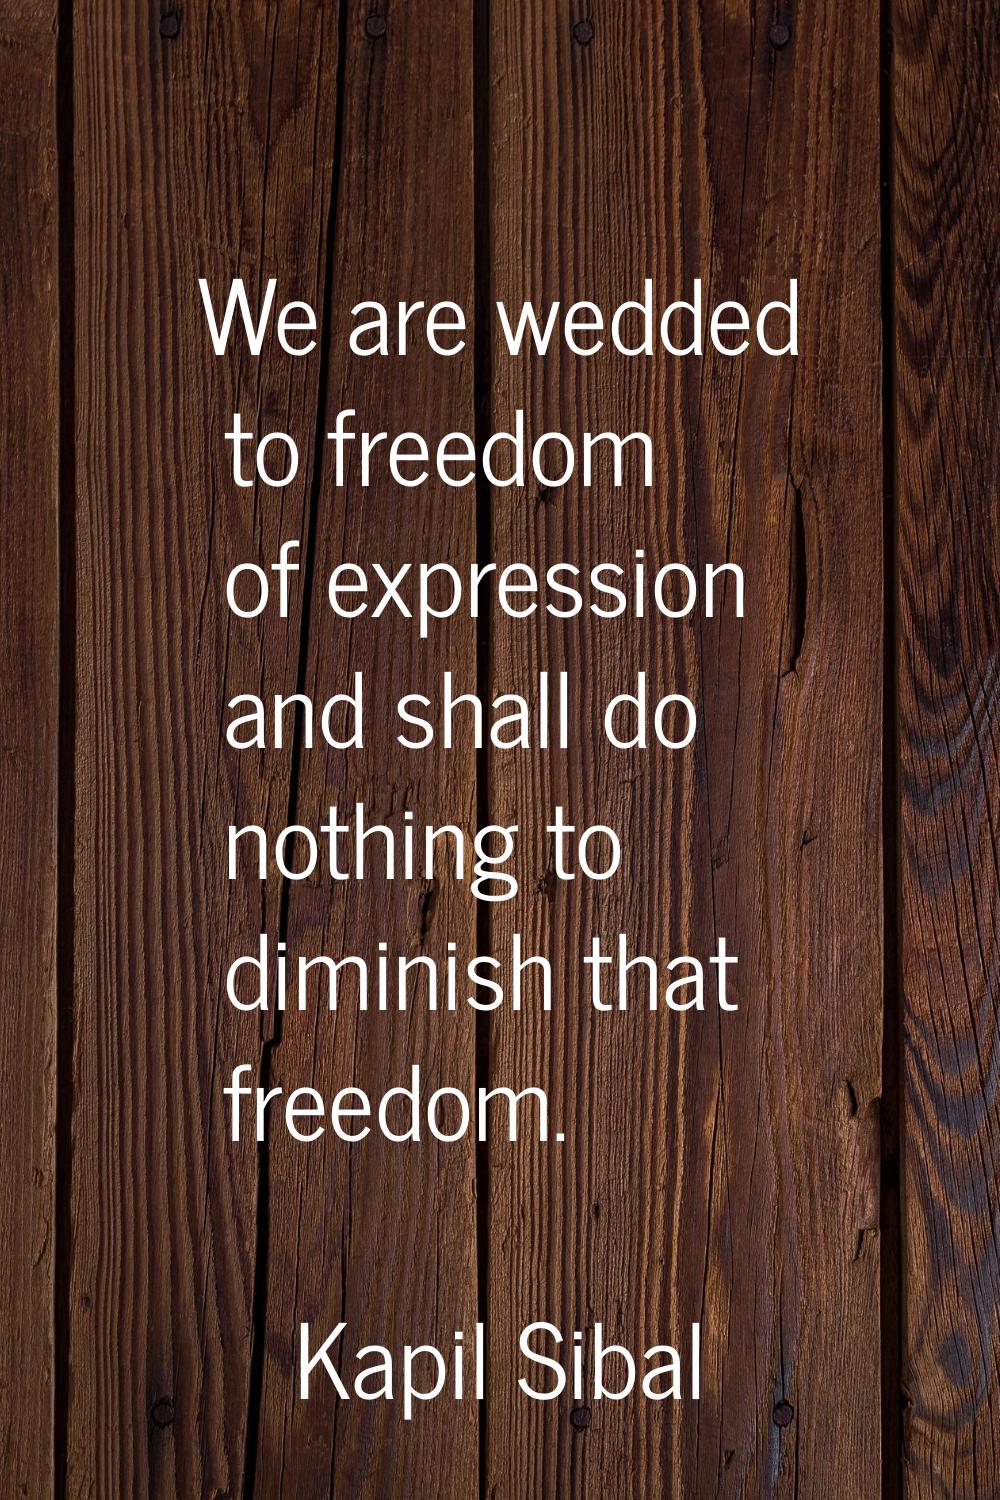 We are wedded to freedom of expression and shall do nothing to diminish that freedom.